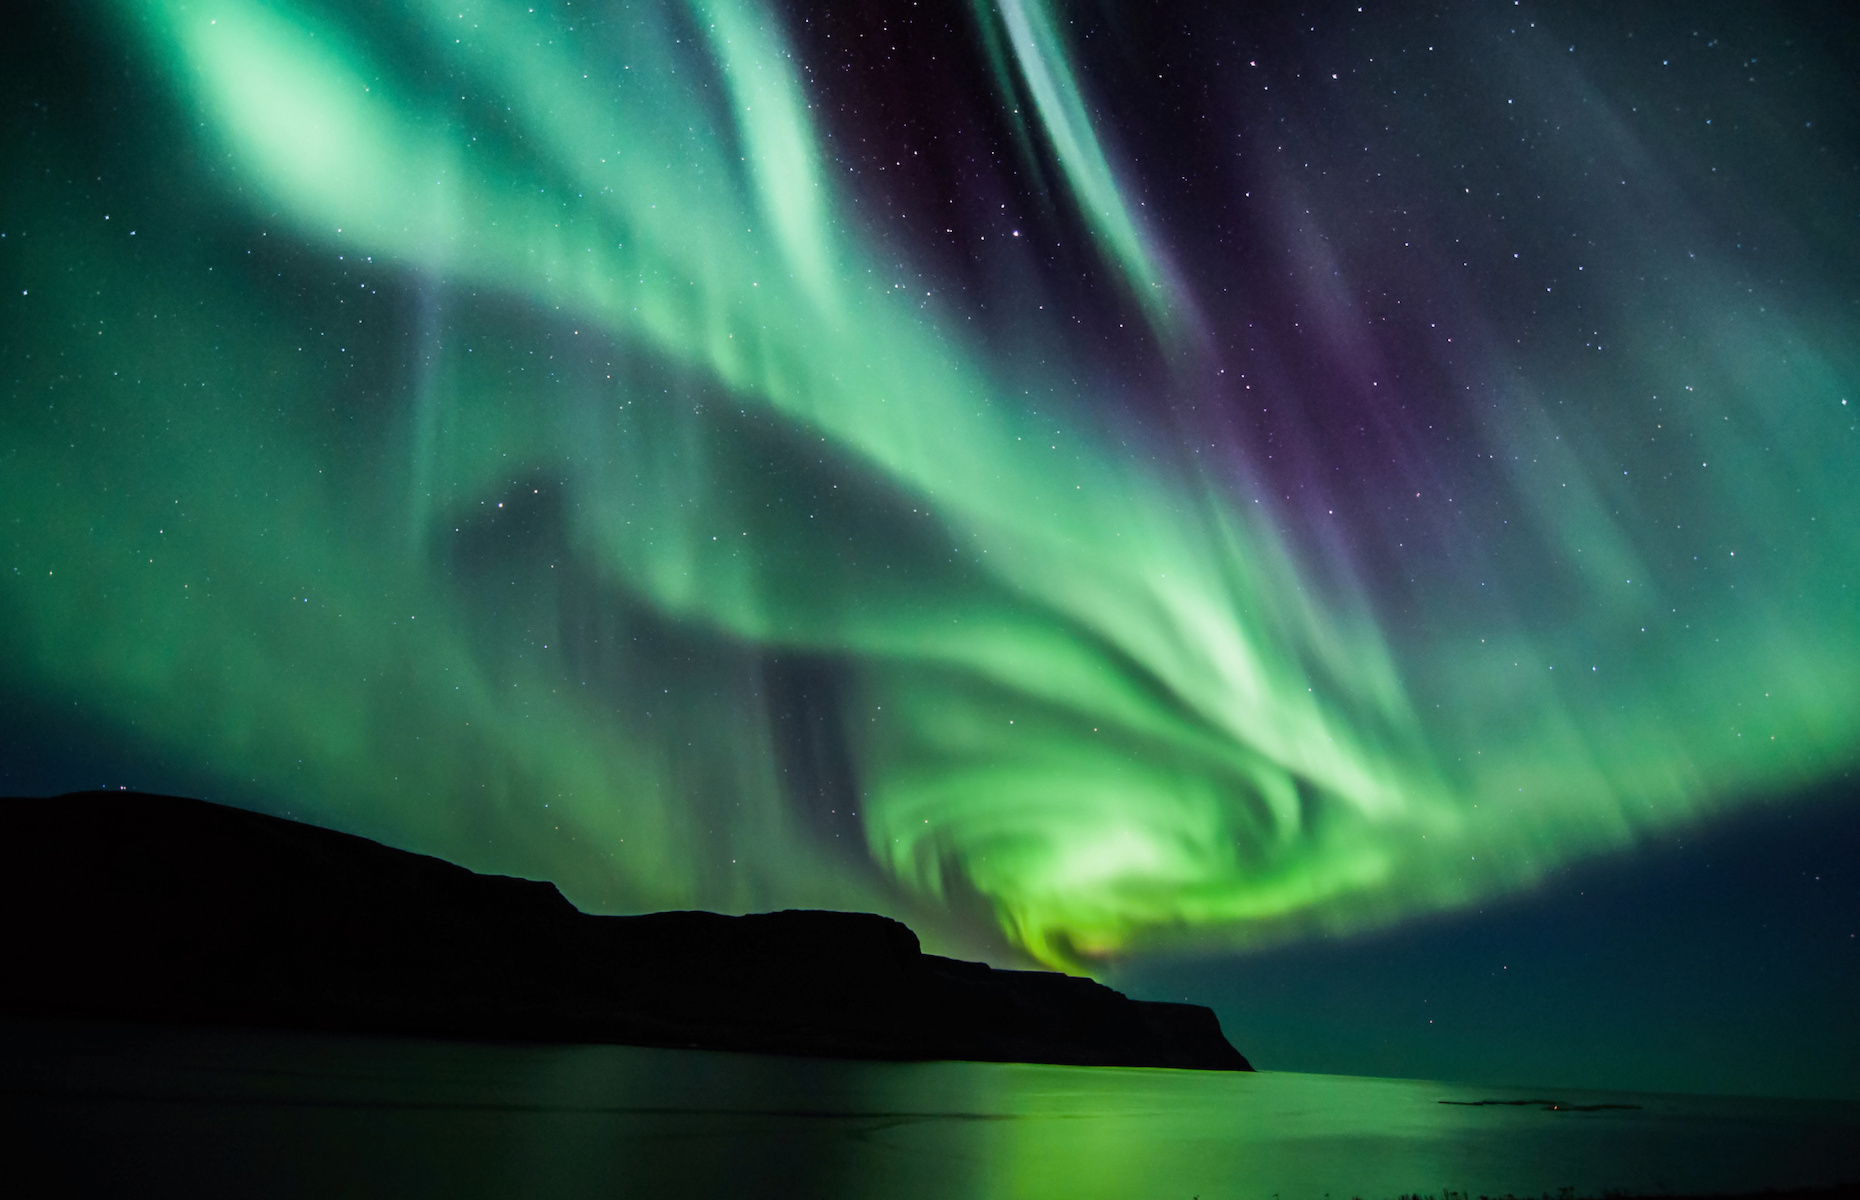 Auroras emerge when moonlight hits certain particles in the air.